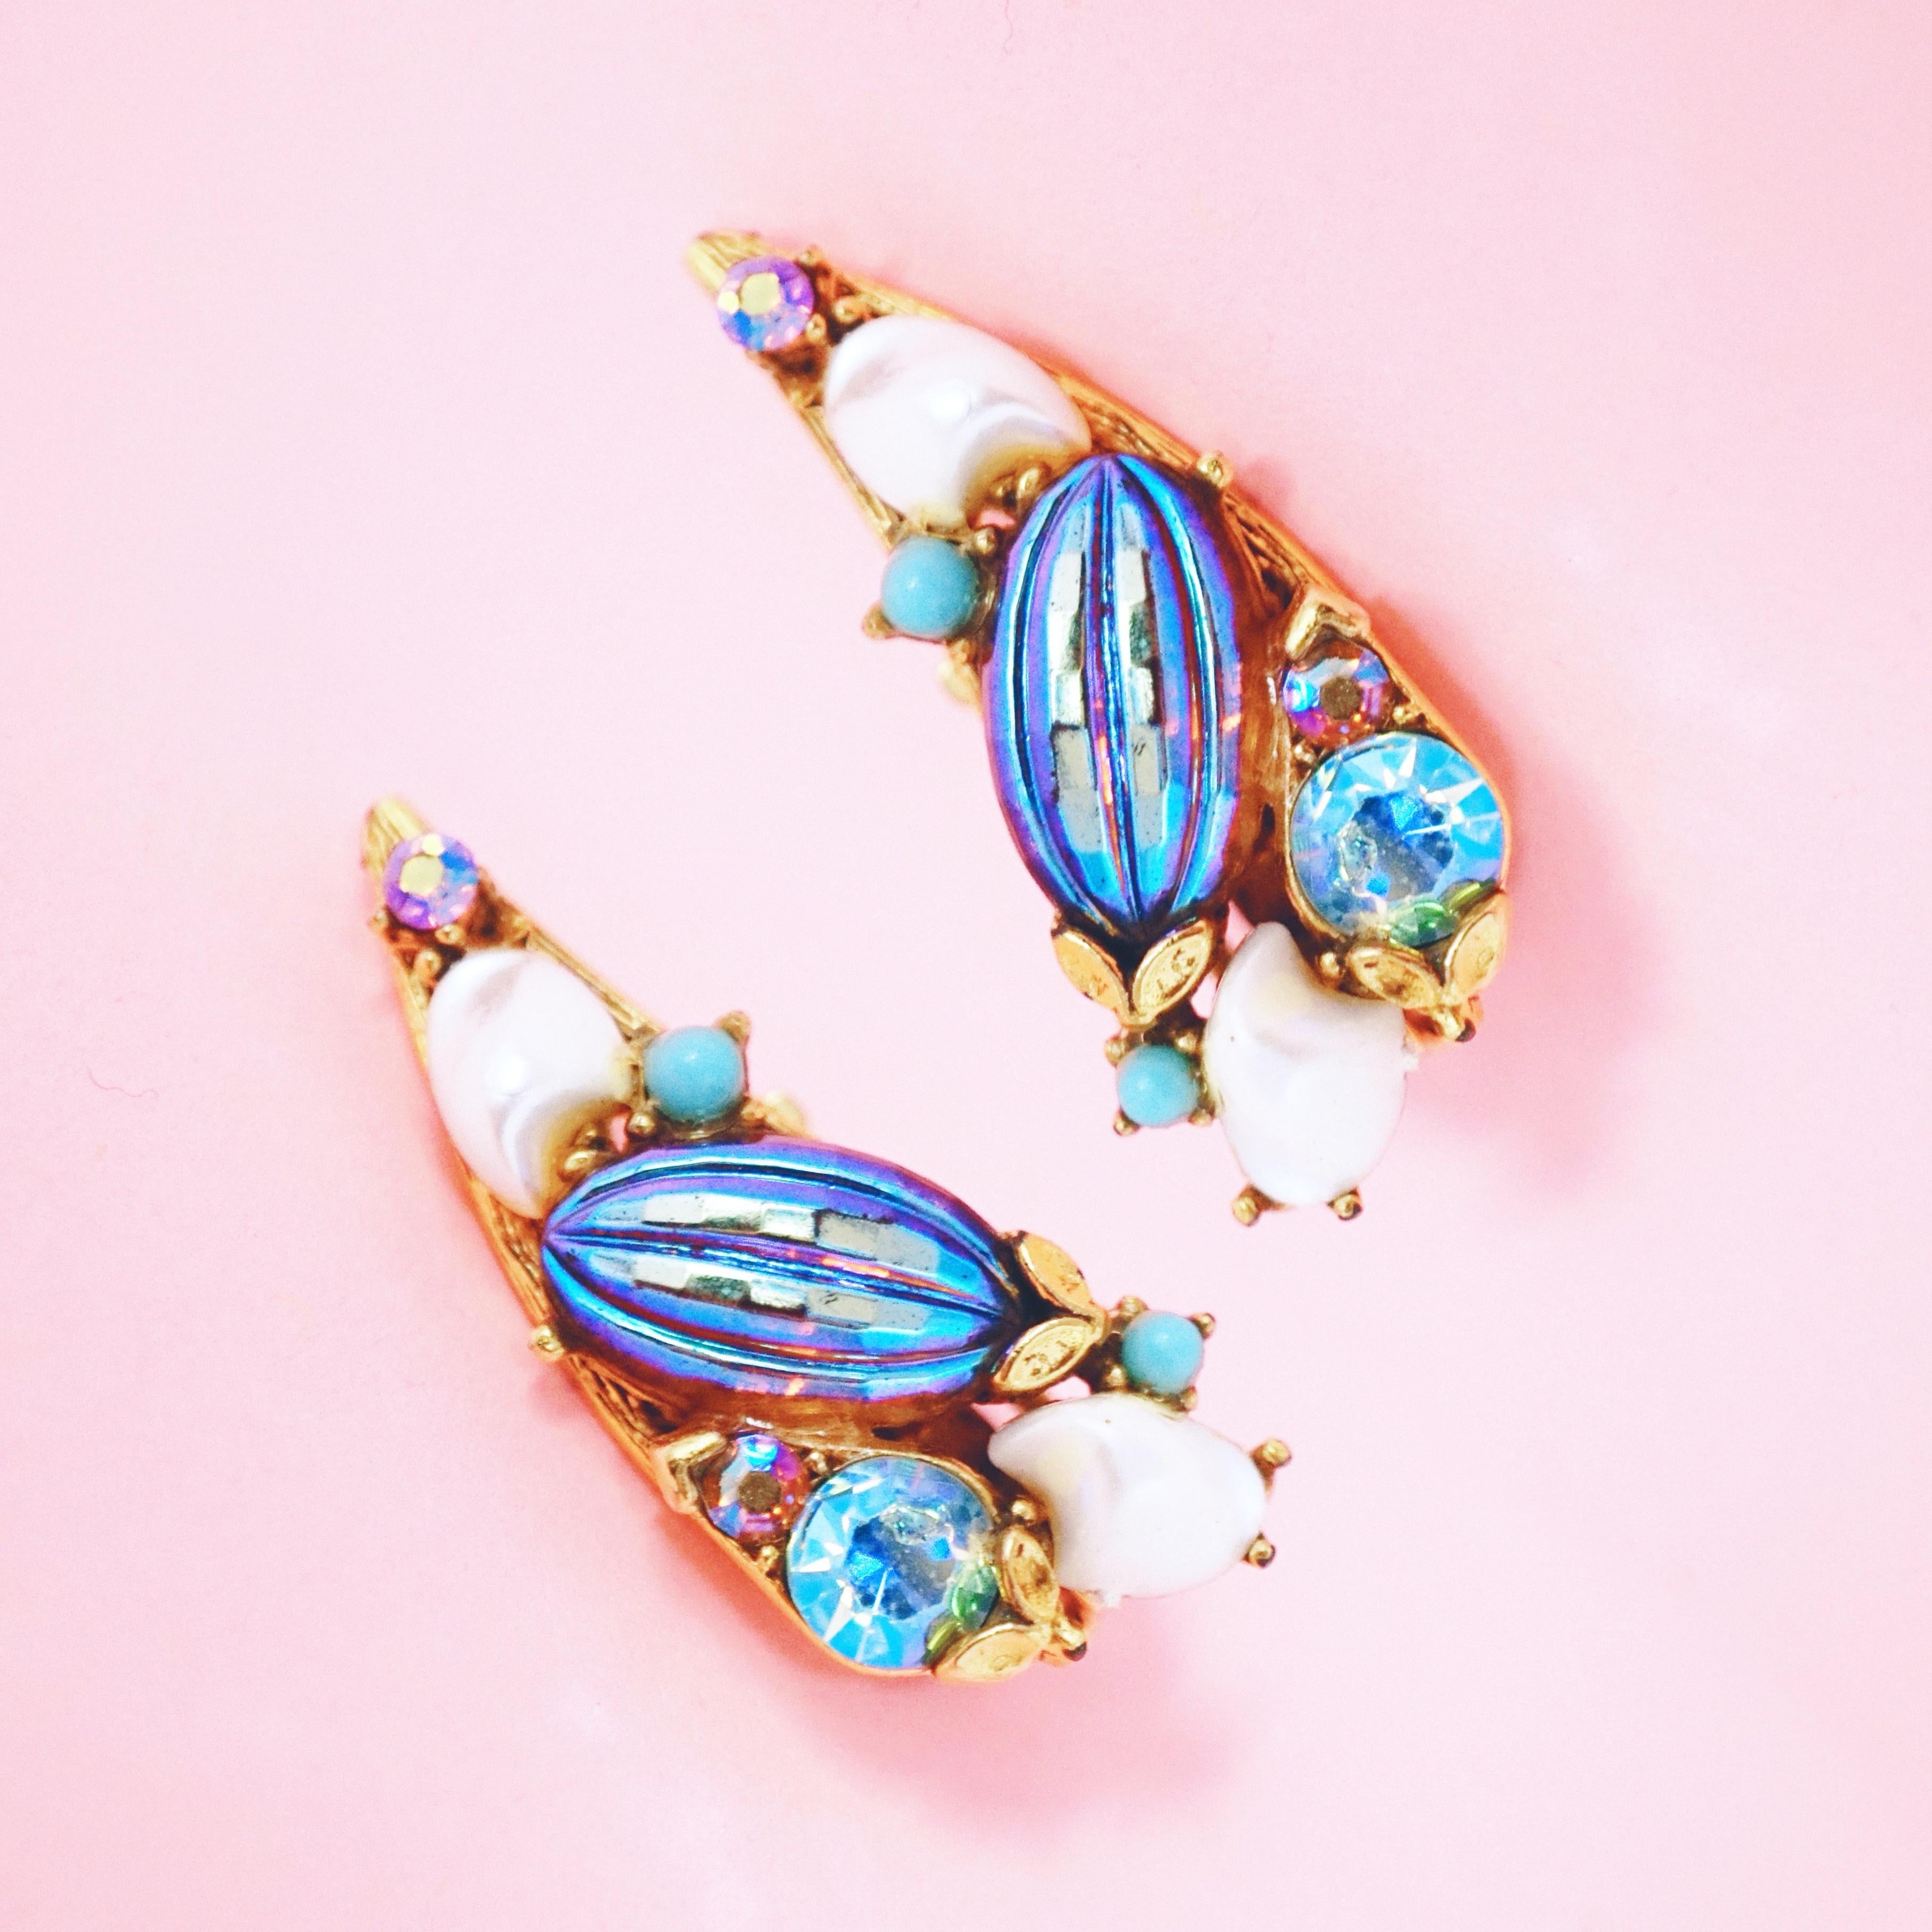 These rare gold plated crawler clip-on earrings by Florenza, circa 1970, are an absolutely stunning statement piece. The rich gilding and unique medley of Aurora Borealis iridescent rhinestones and glass beads with faux pearl and turquoise cabochons